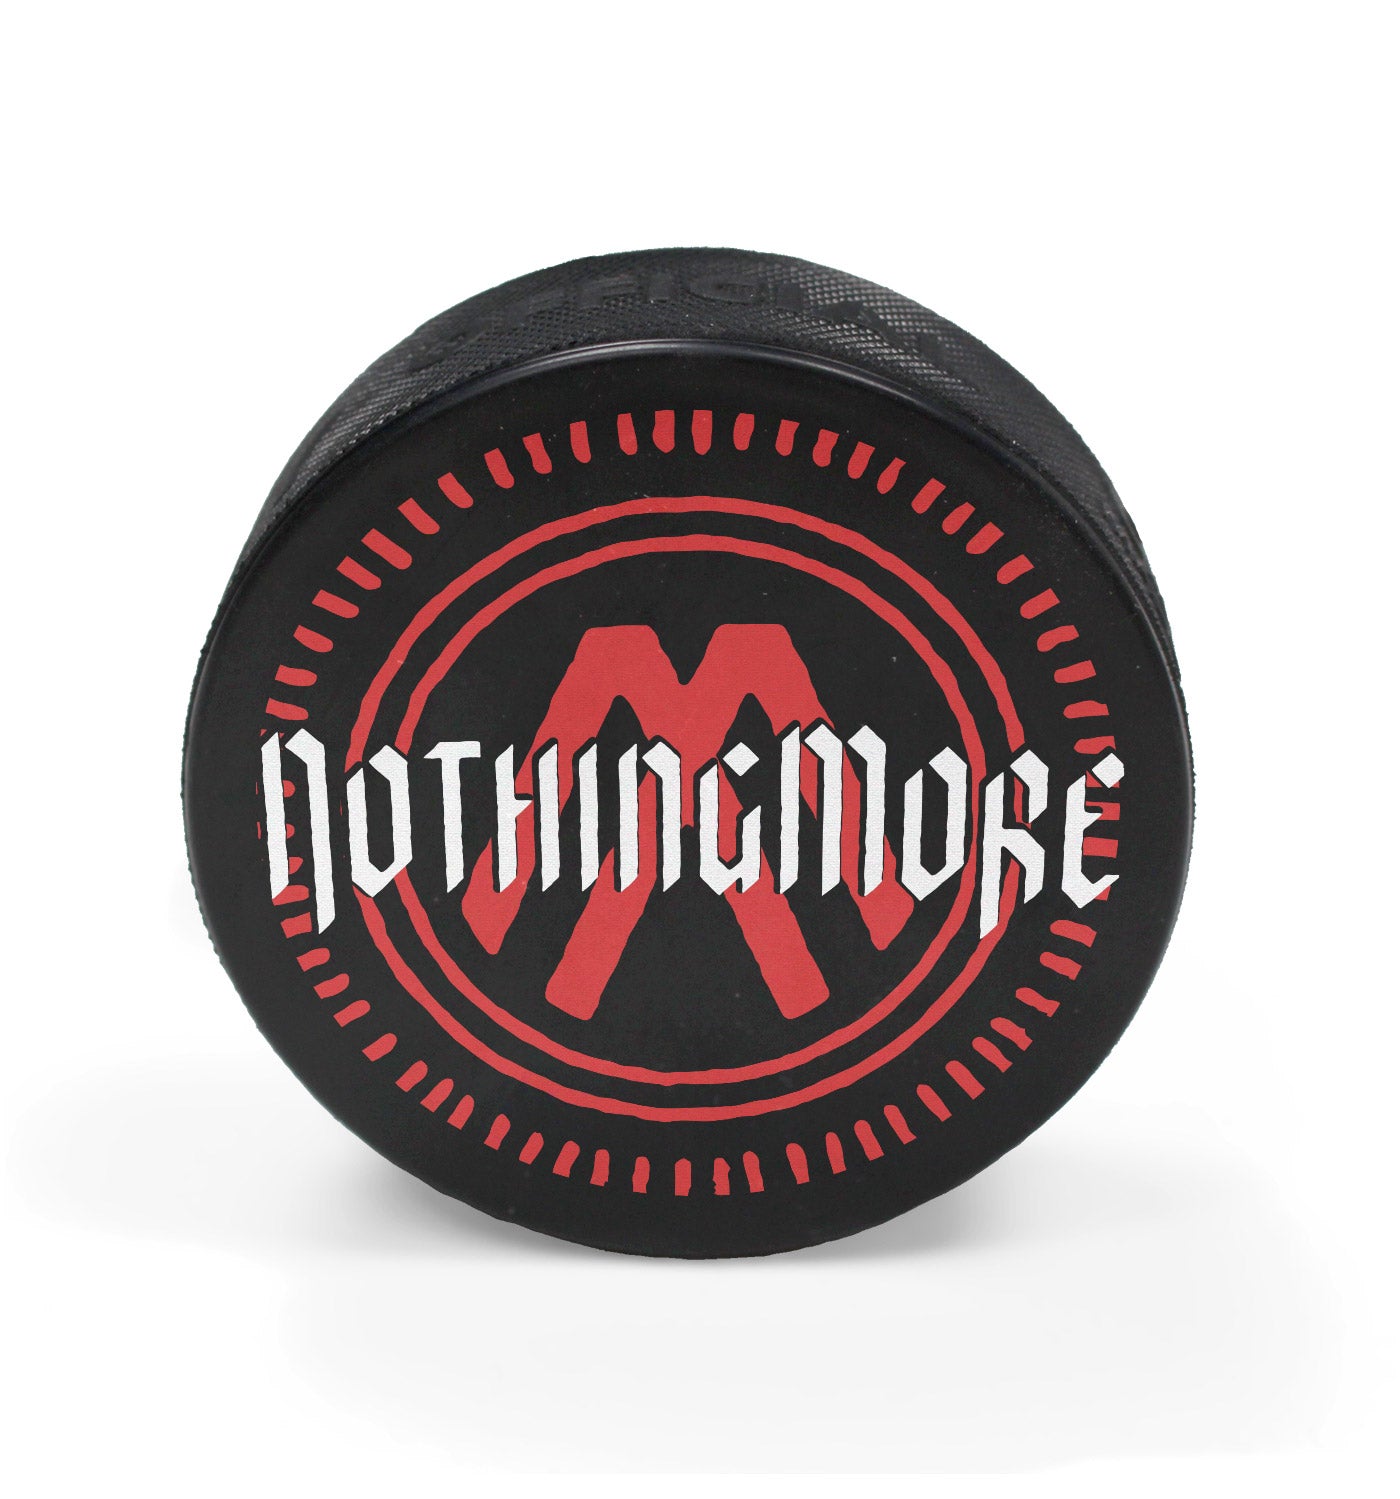 NOTHING MORE 'VALHALLA' limited edition hockey puck